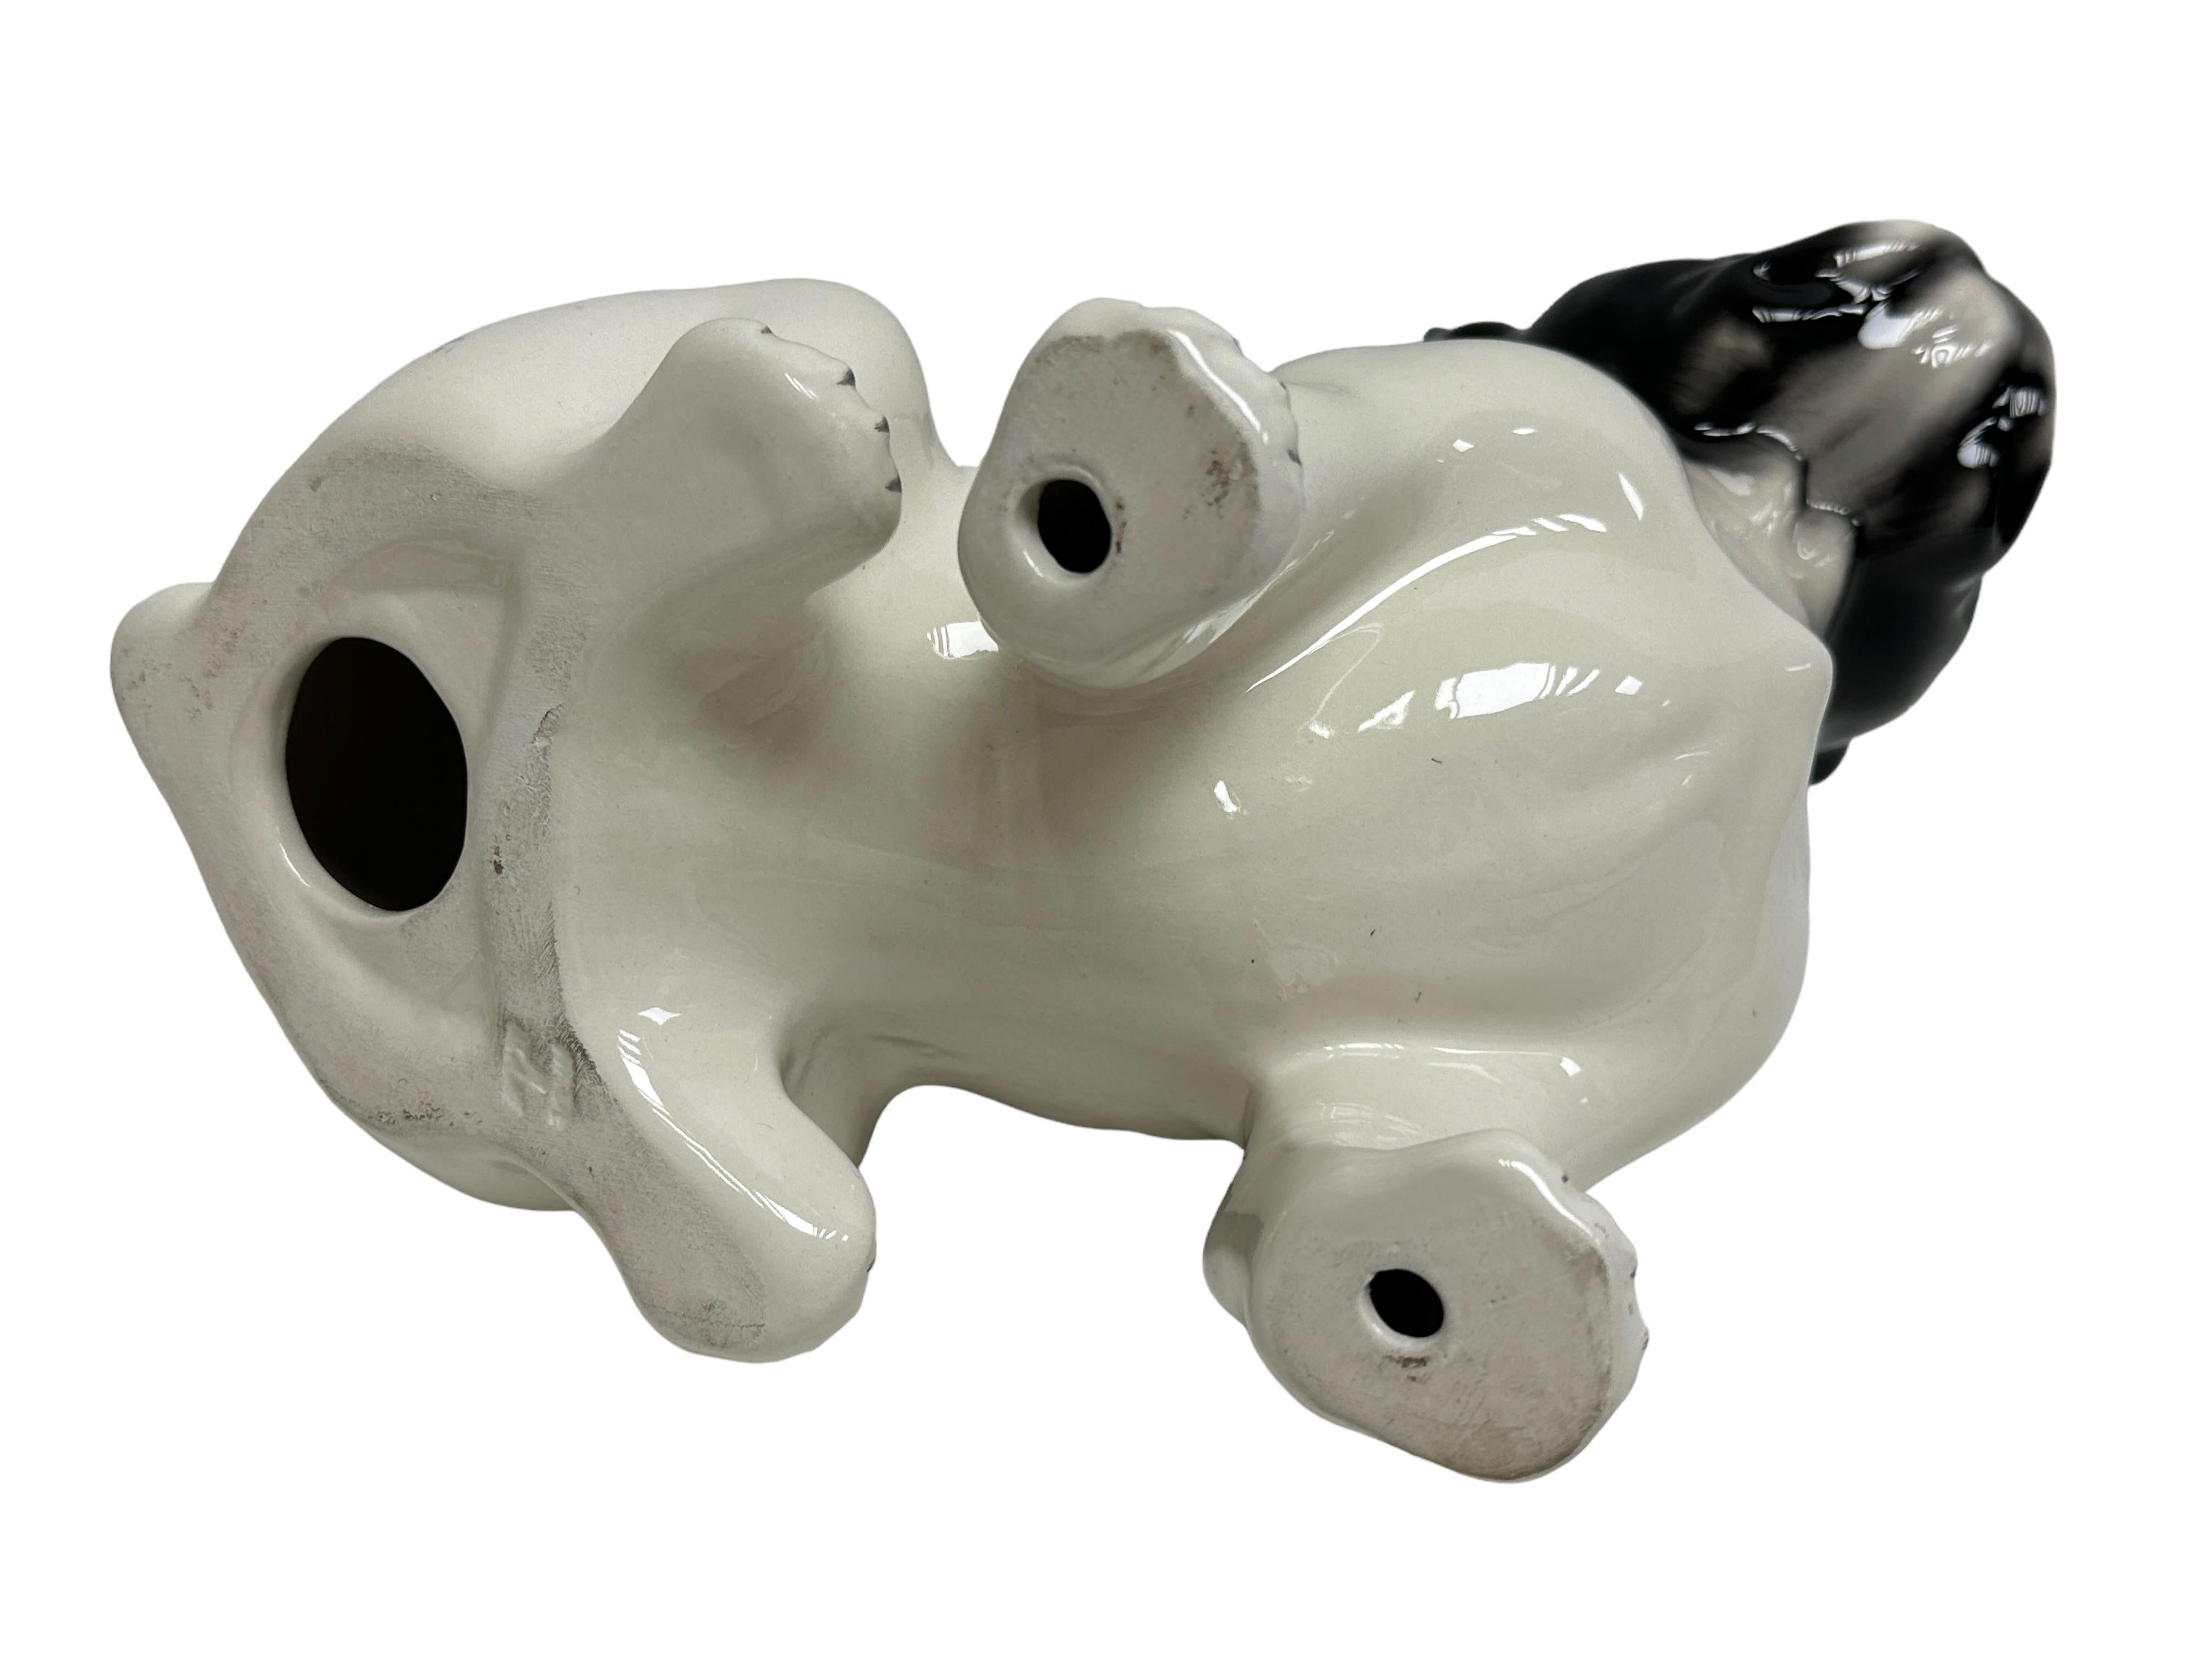 Italian Marvelous French Bulldog Pug Dogs Ceramic Statue Sculpture Vintage, Italy, 1980s For Sale